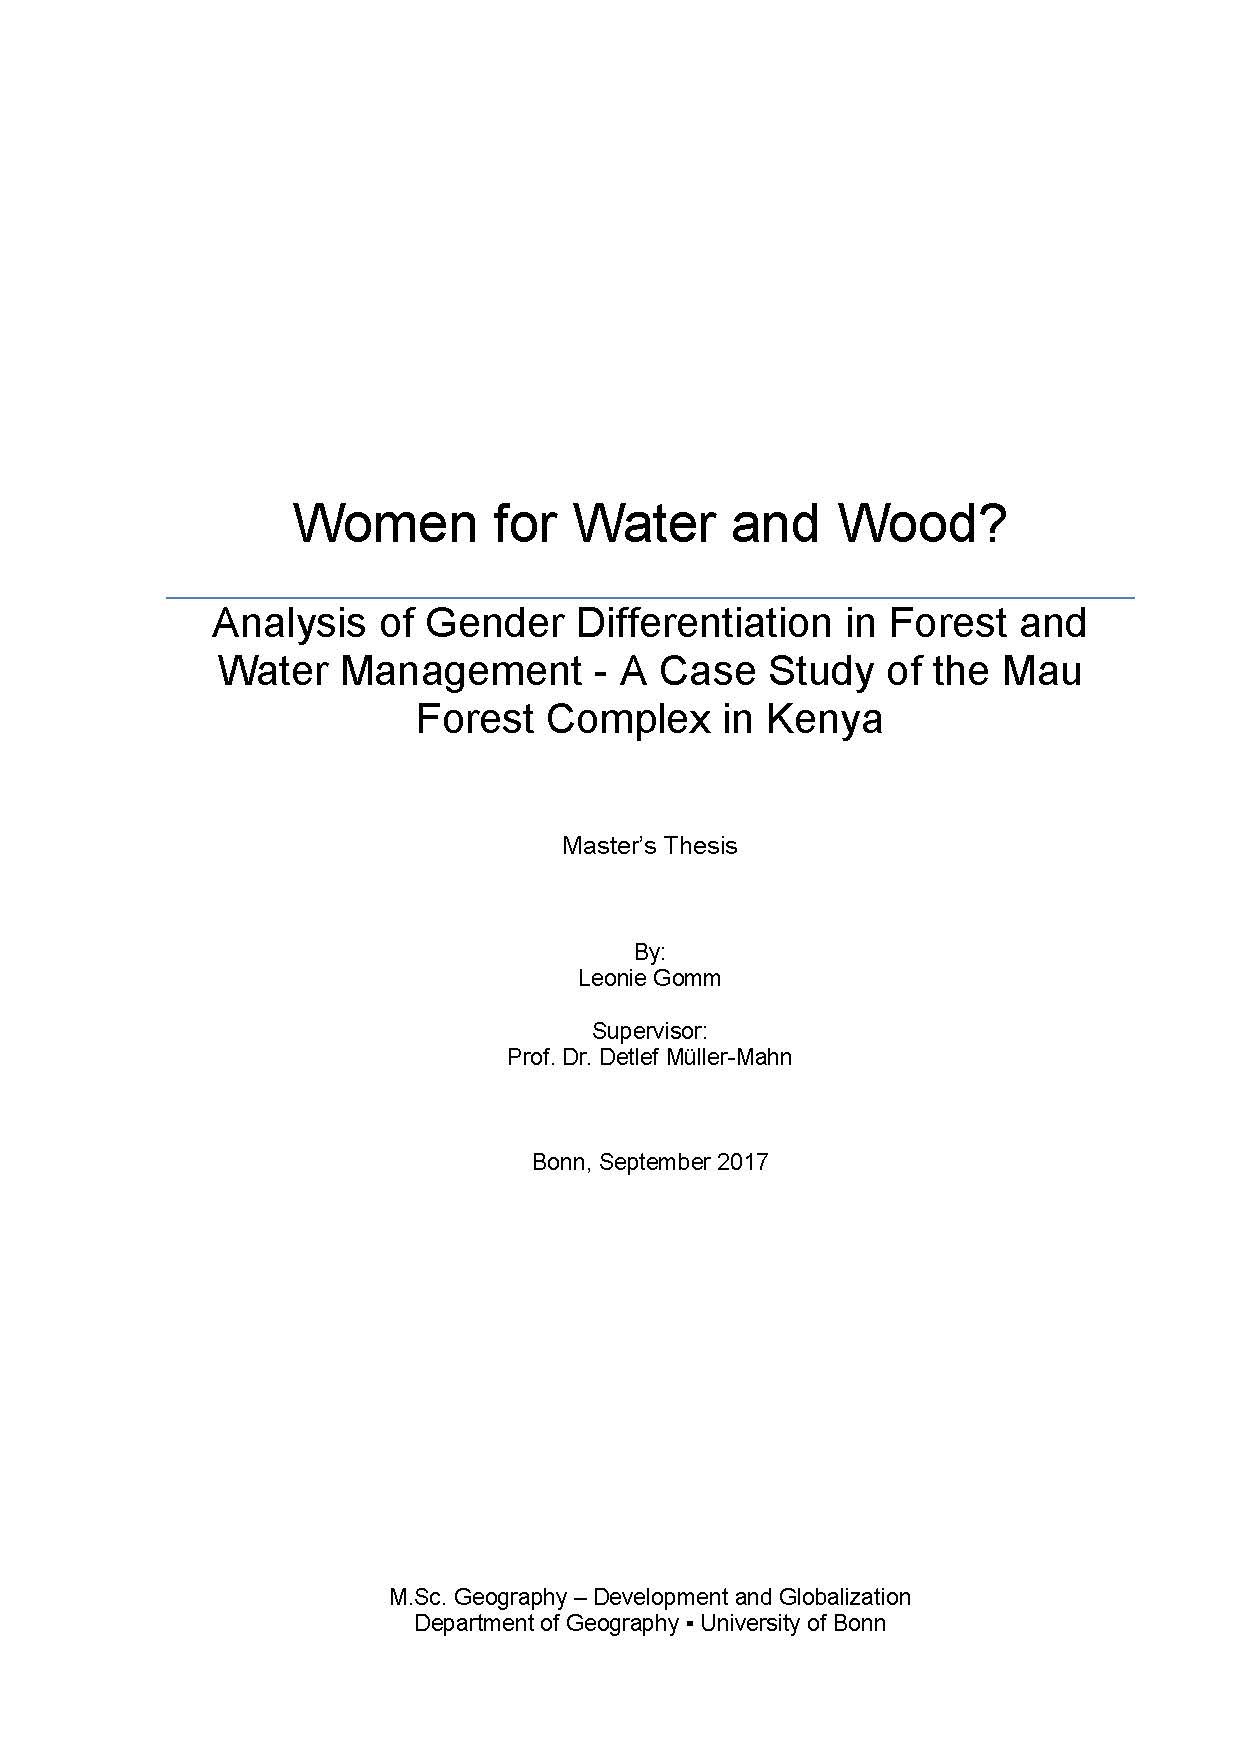 Women for Water and Wood?: Analysis of Gender Differentiation in Forest and Water Management &#8211; A Case Study of the Mau Forest Complex in Kenya